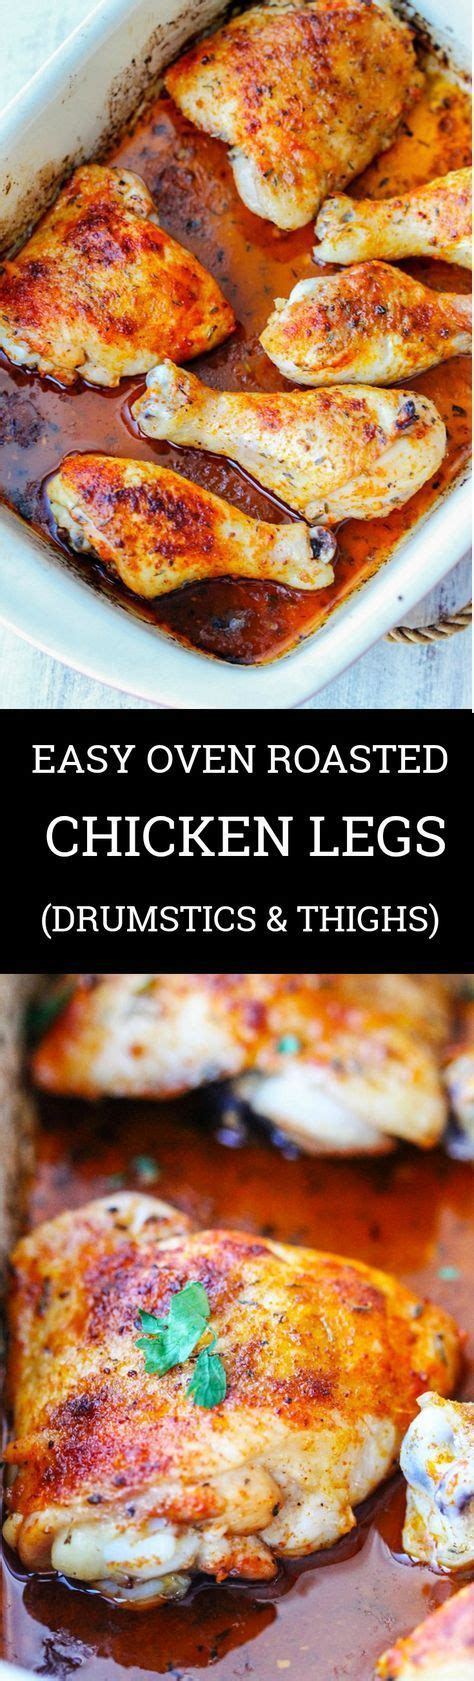 oven roasted chicken legs thighs and drumsticks eating european recipe oven roasted